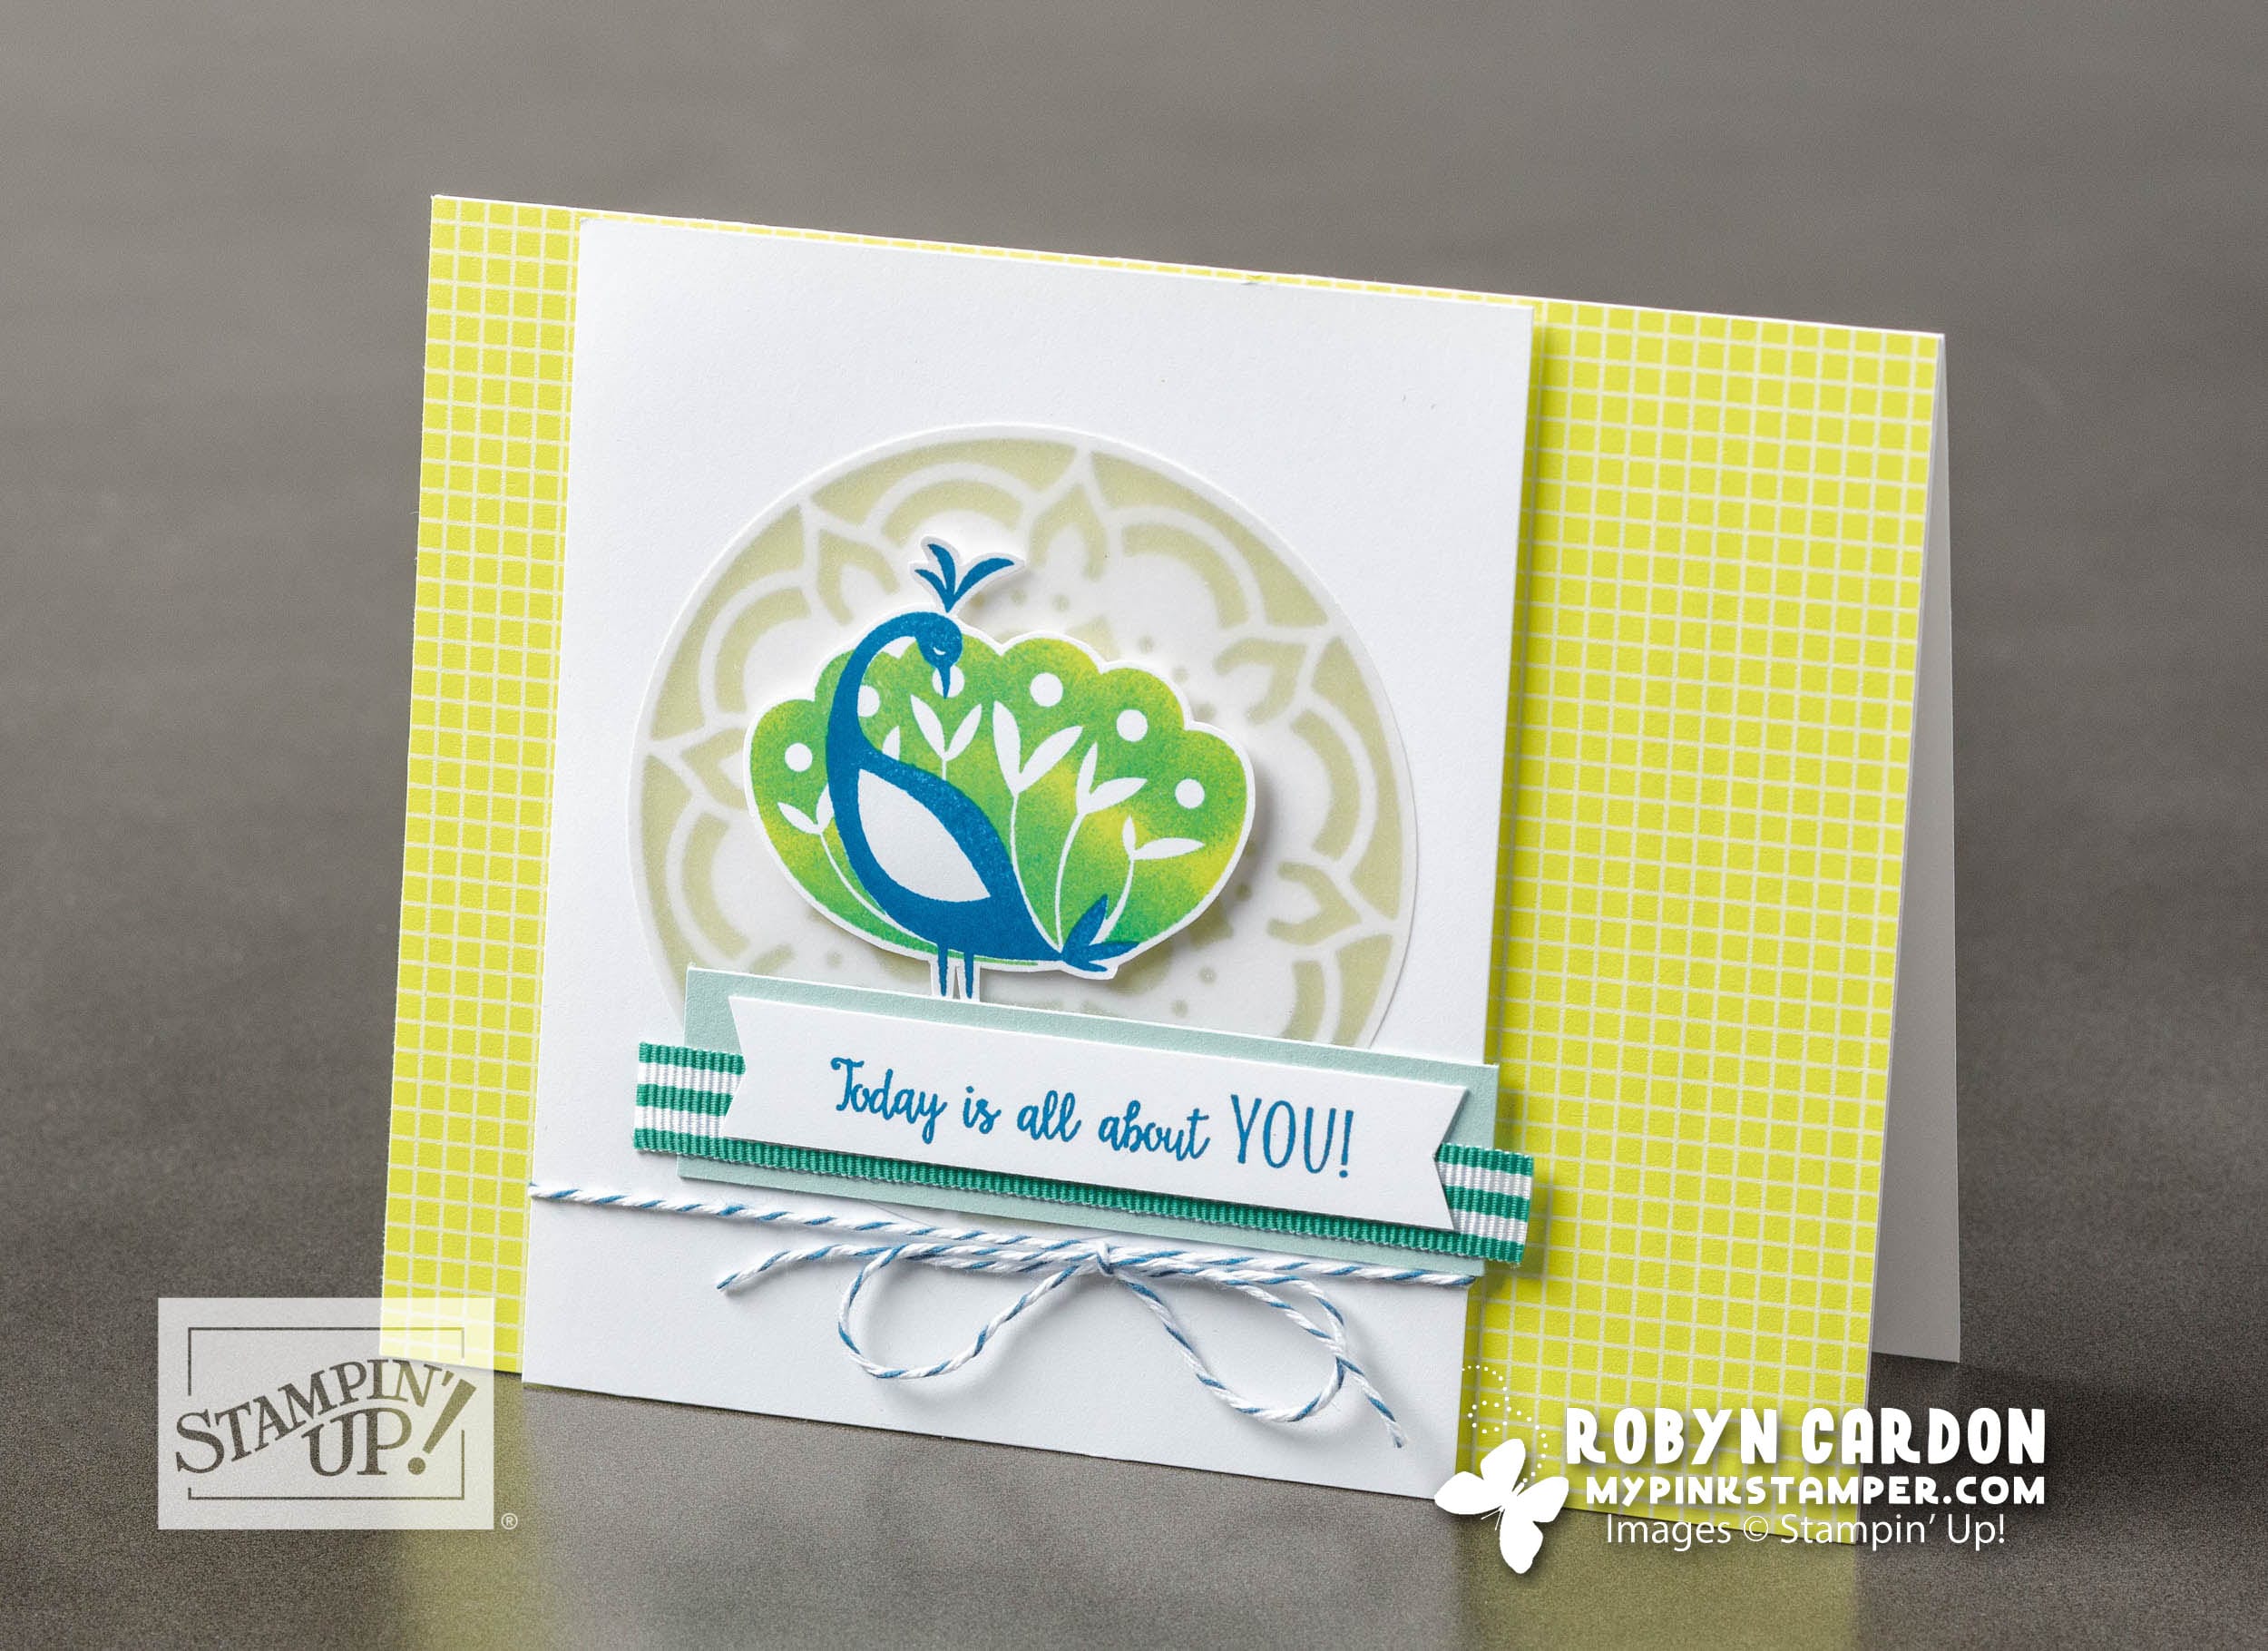 Stampin’ Up! Beautiful Peacock Sale-a-bration & My Pink Candy Giveaway